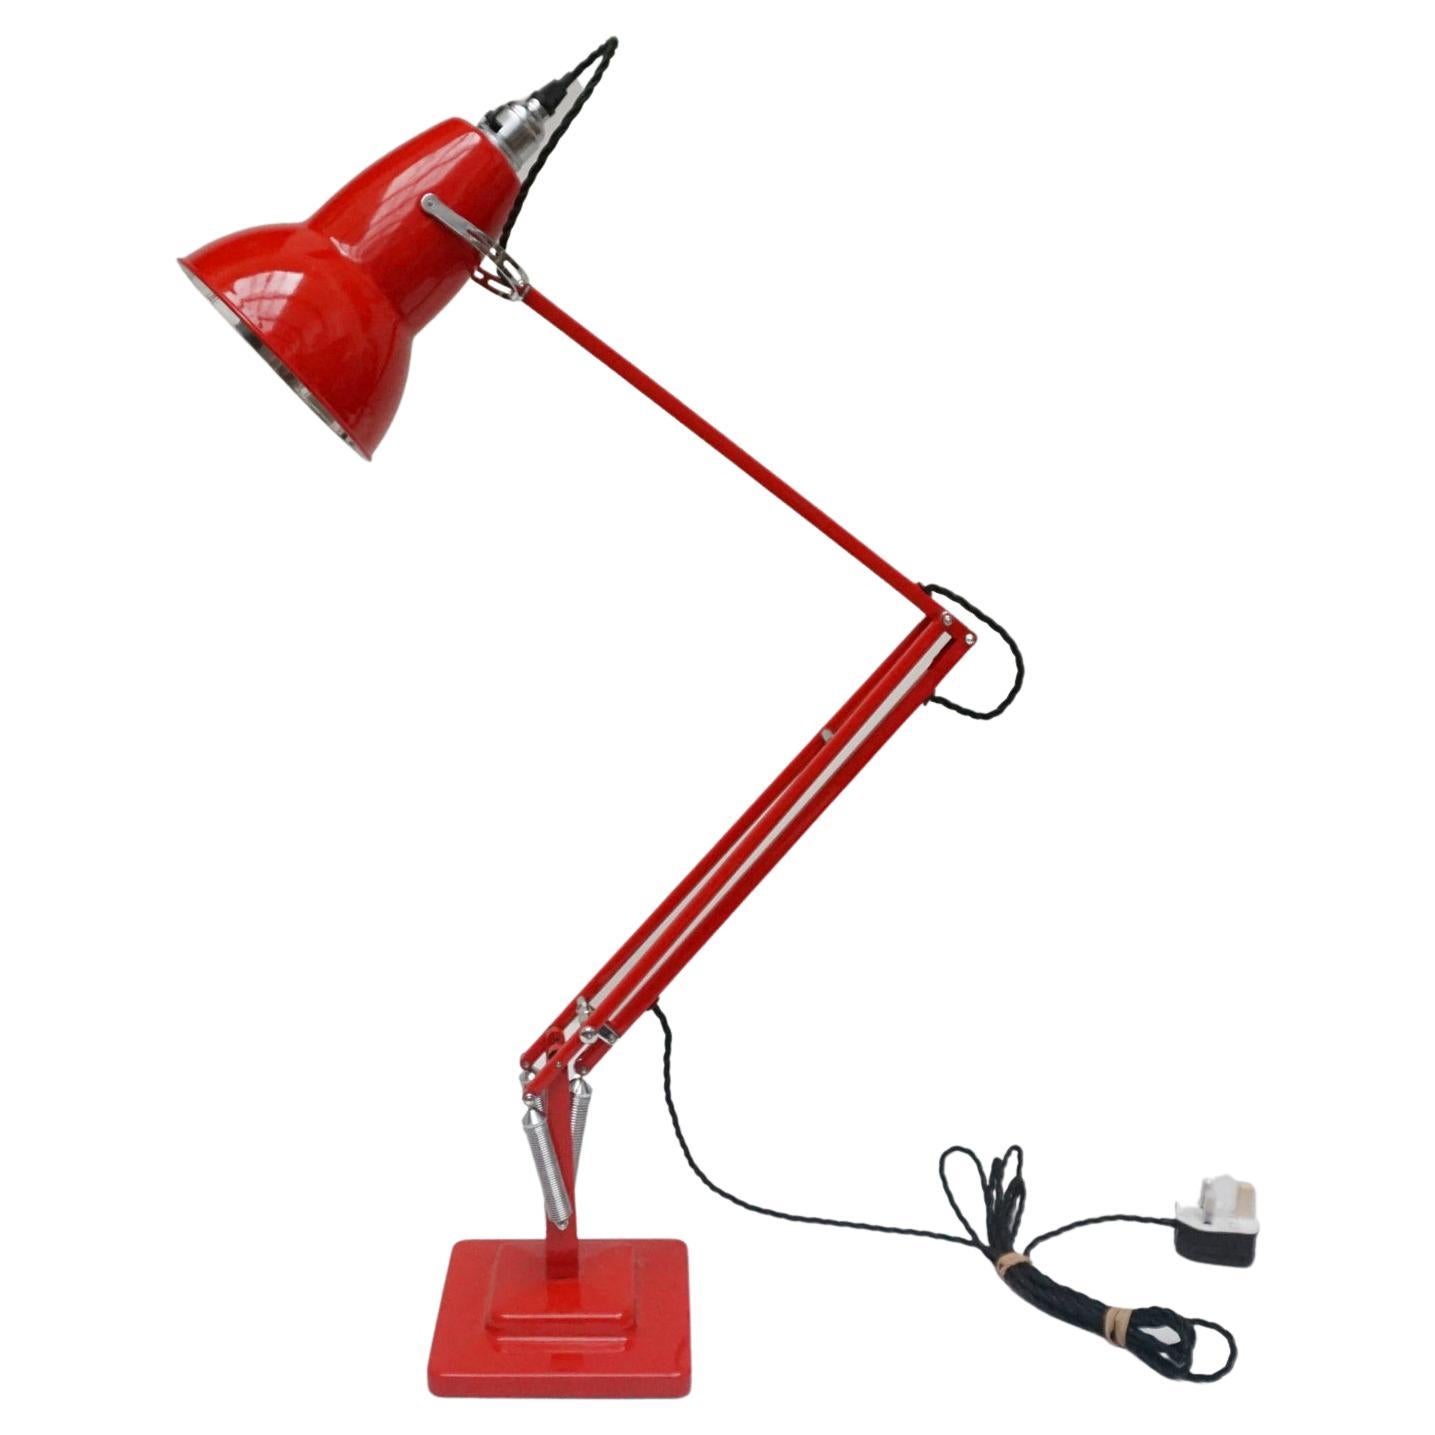 Vintage Herbert Terry & Sons Repainted Red Anglepoise Desk Lamp